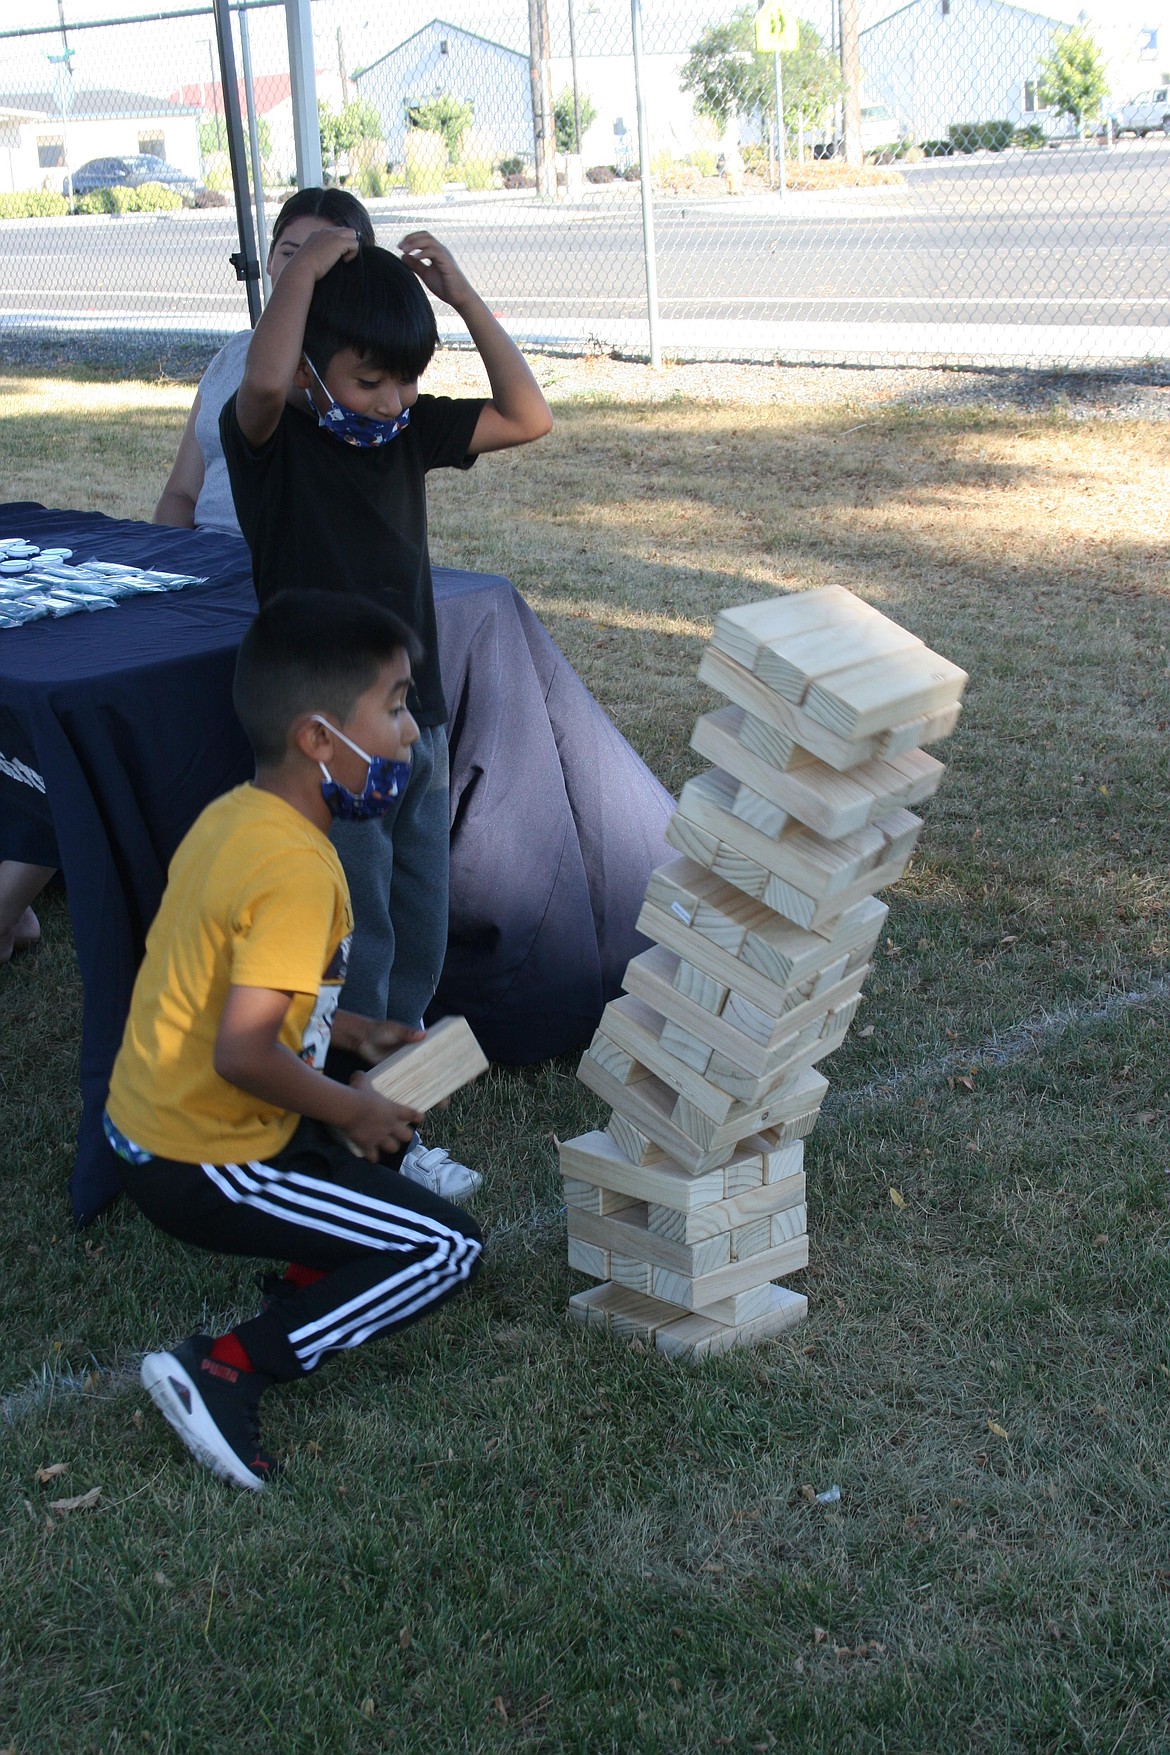 The tower goes down, to the chagrin of the children playing, during National Night Out in Mattawa.